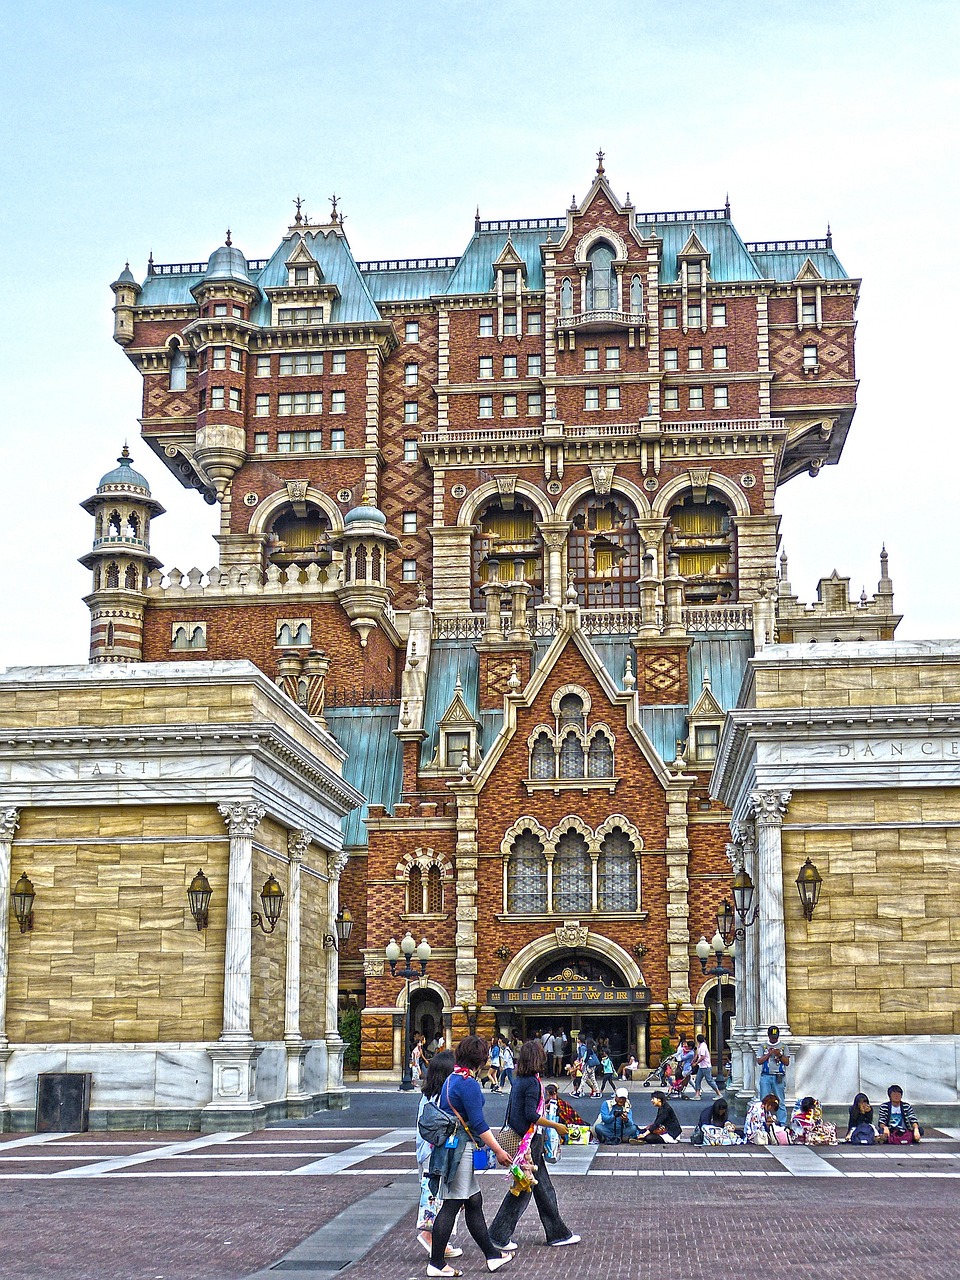 What Are The Top Tourist Attractions In Tokyo?